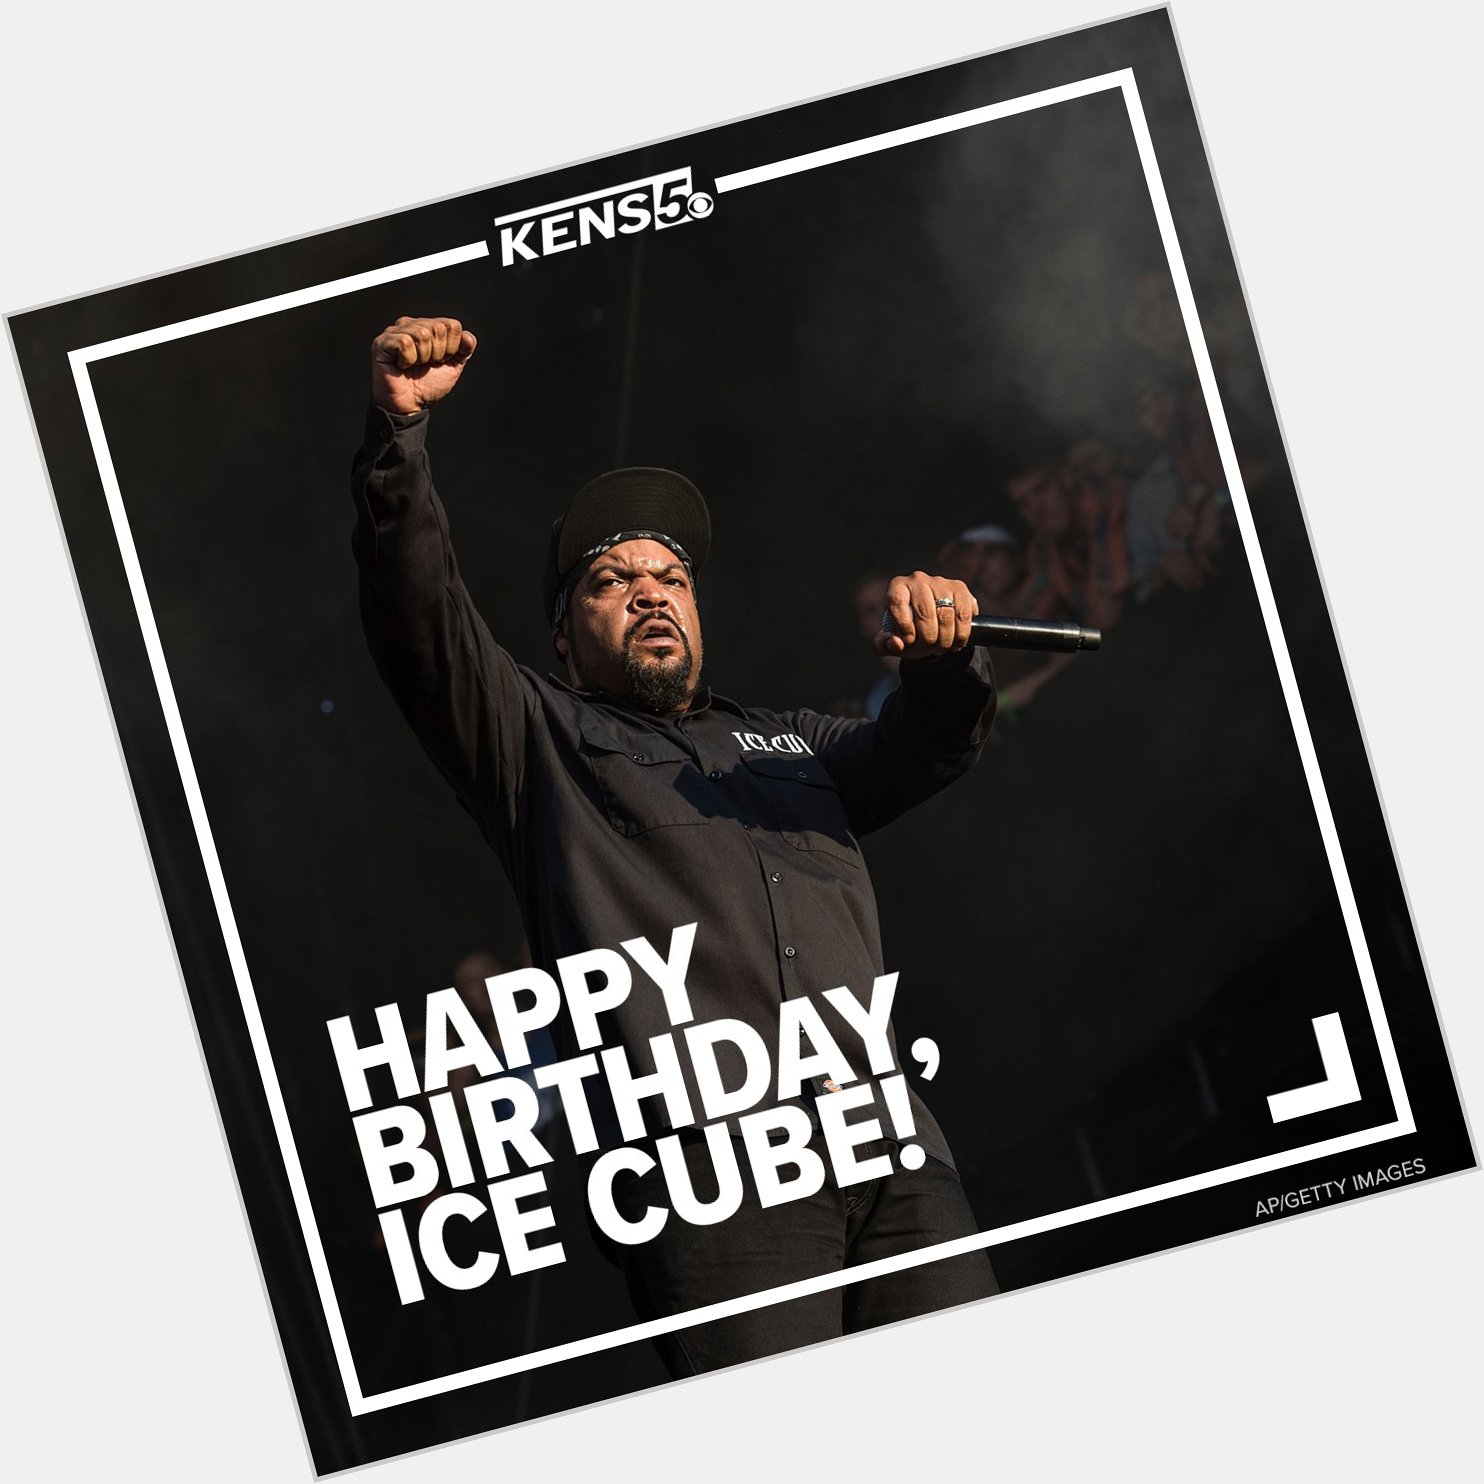 Join us in wishing Ice Cube a very happy birthday! He turns 52 today!  